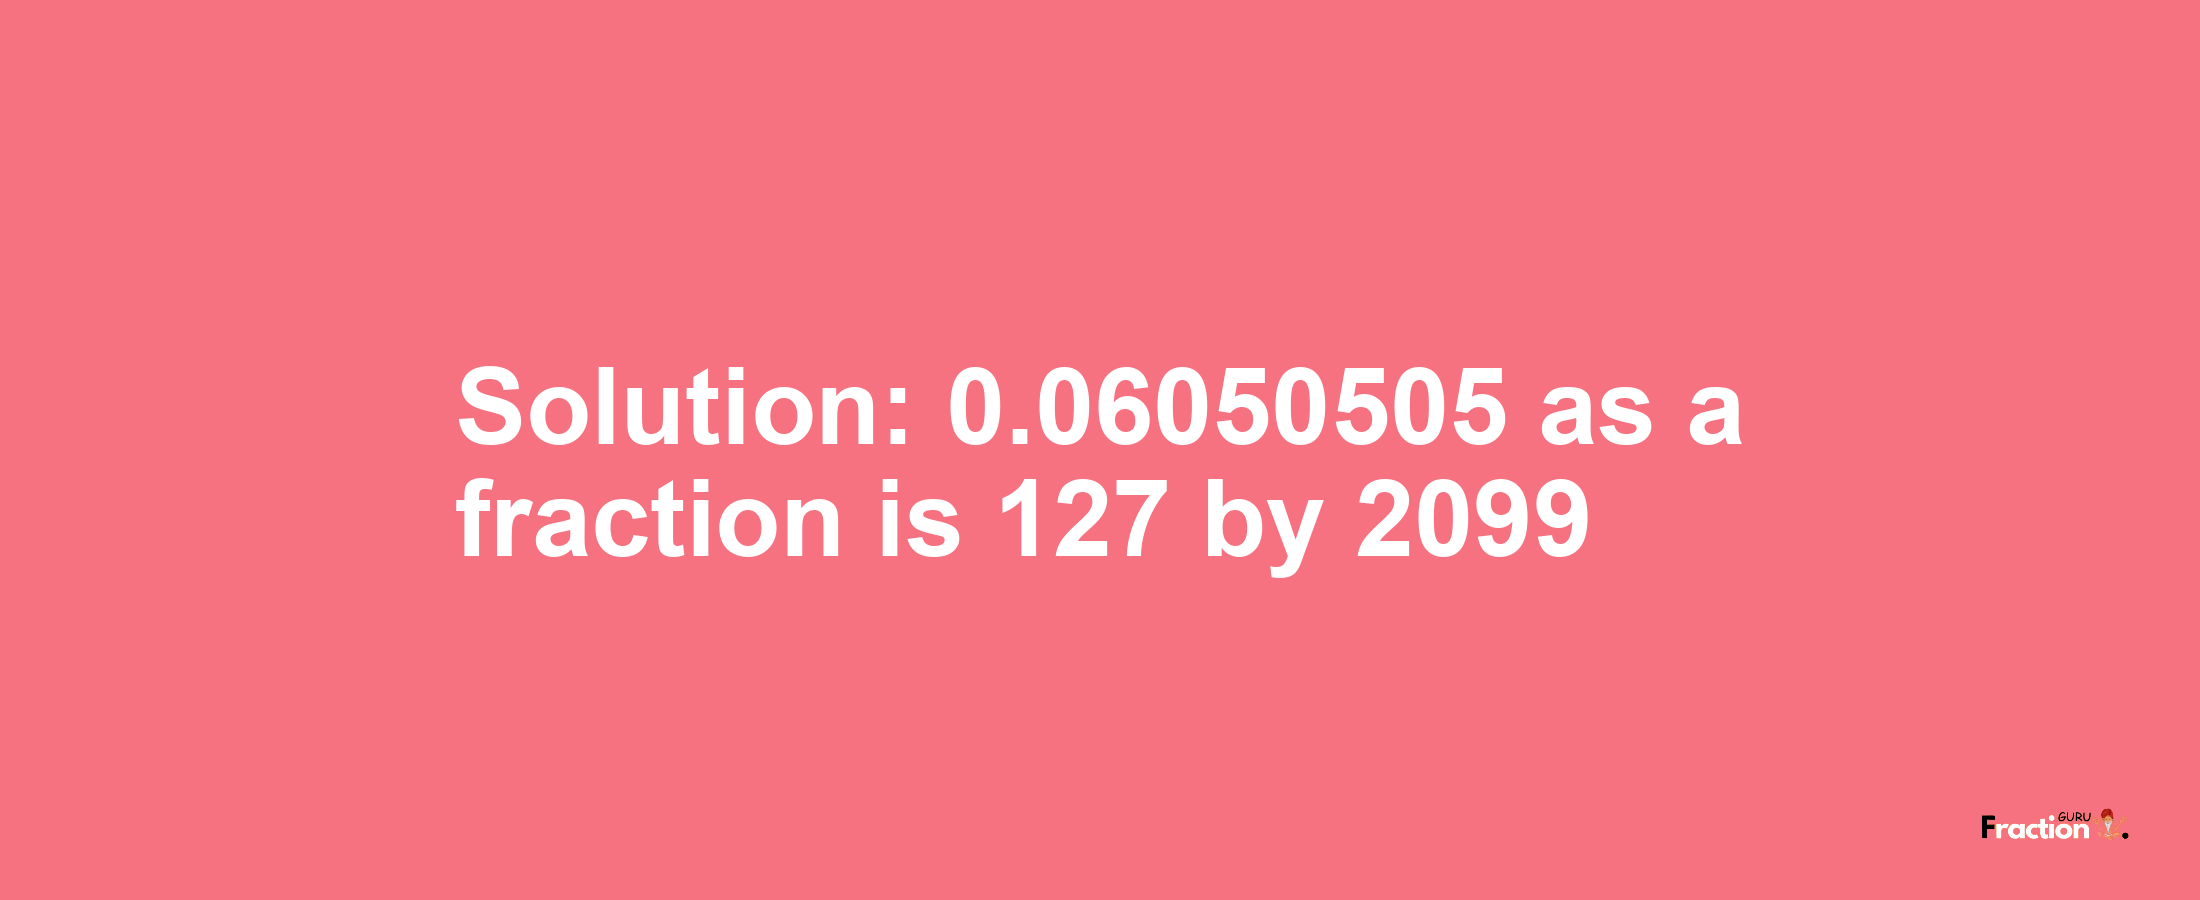 Solution:0.06050505 as a fraction is 127/2099